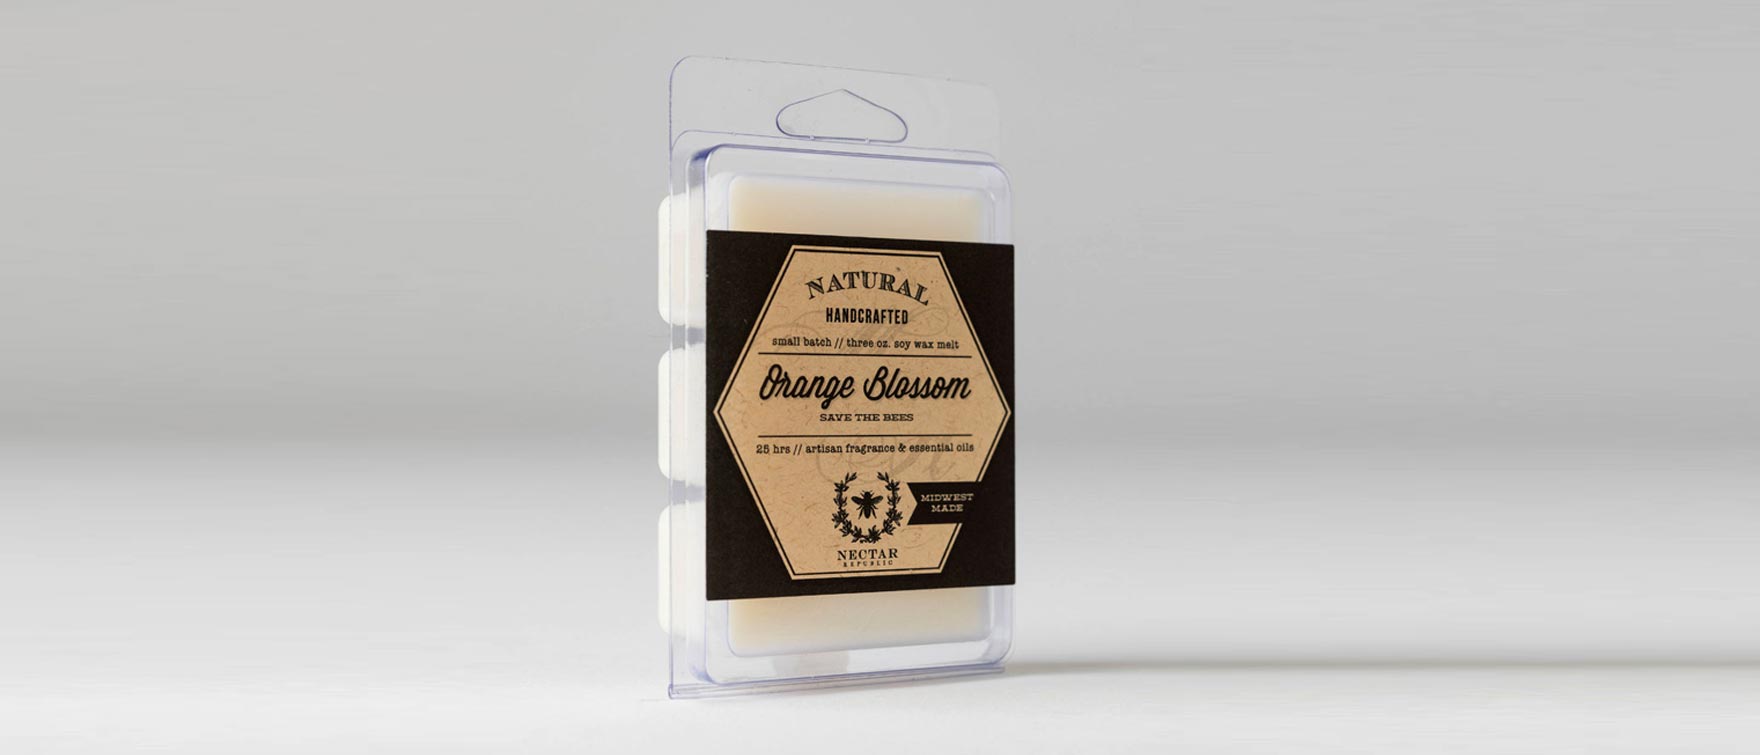 4. Orange Blossom Scented Wax Melts